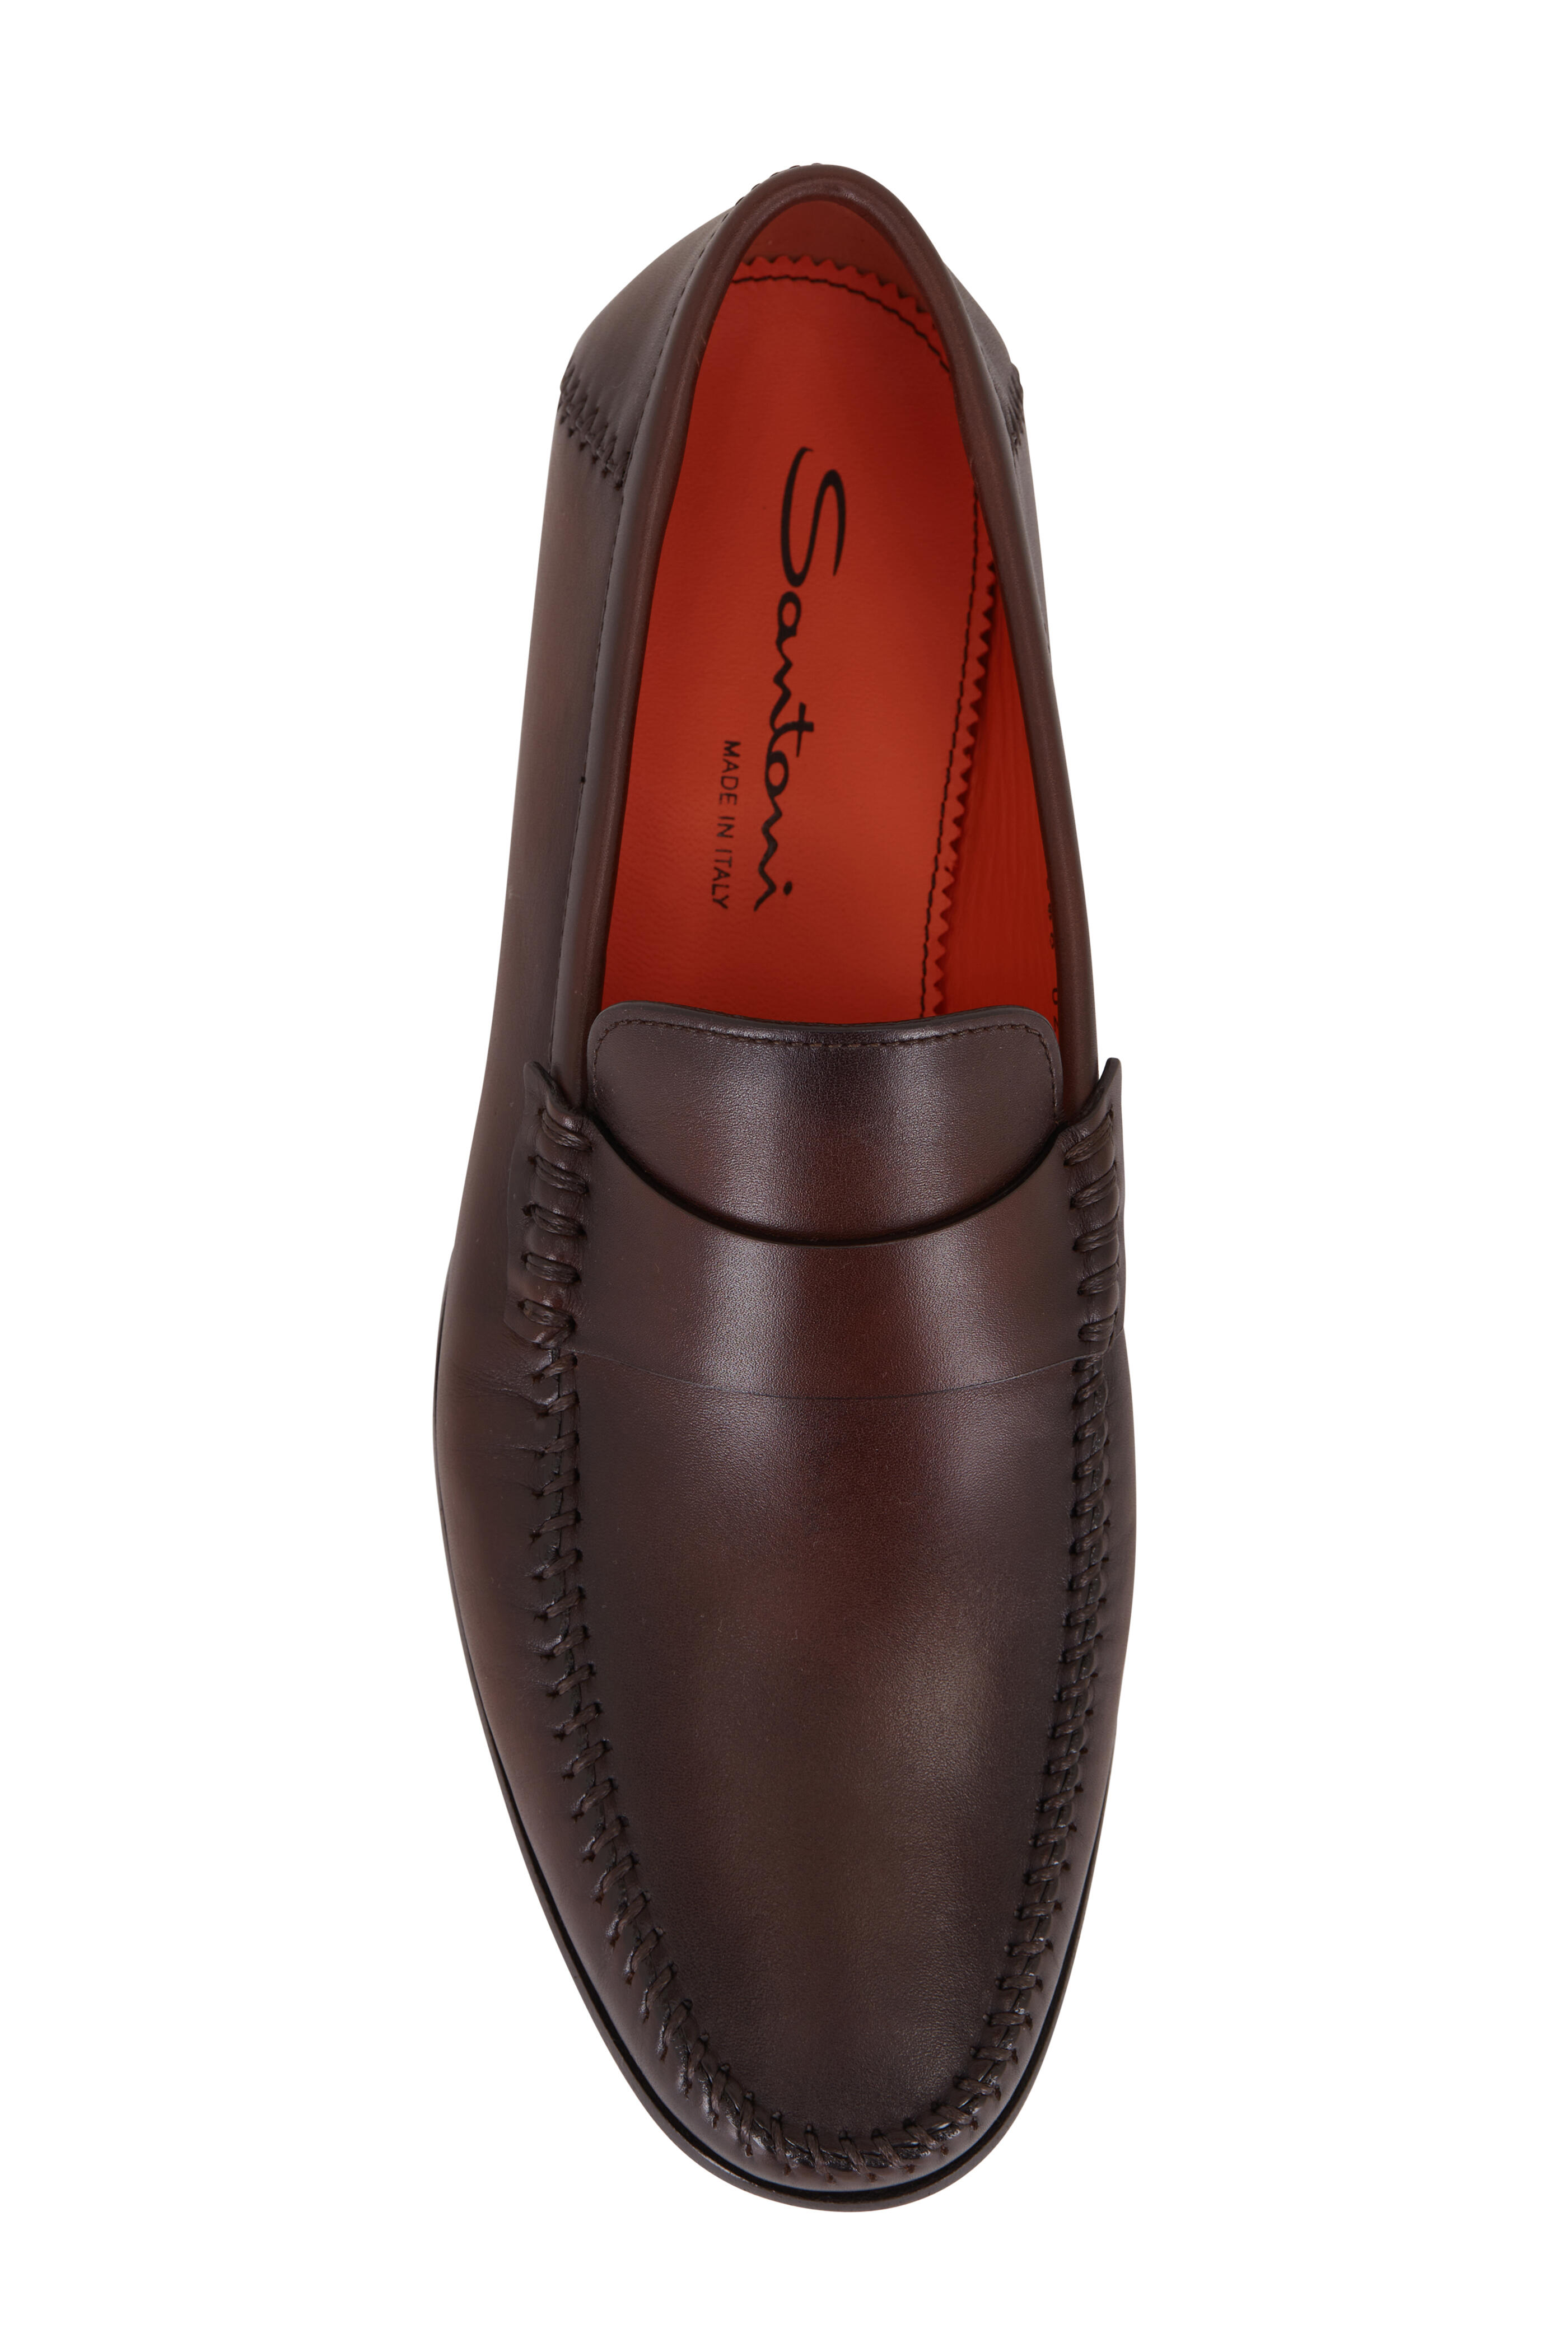 Santoni - Paine Brown Leather Loafer | Mitchell Stores